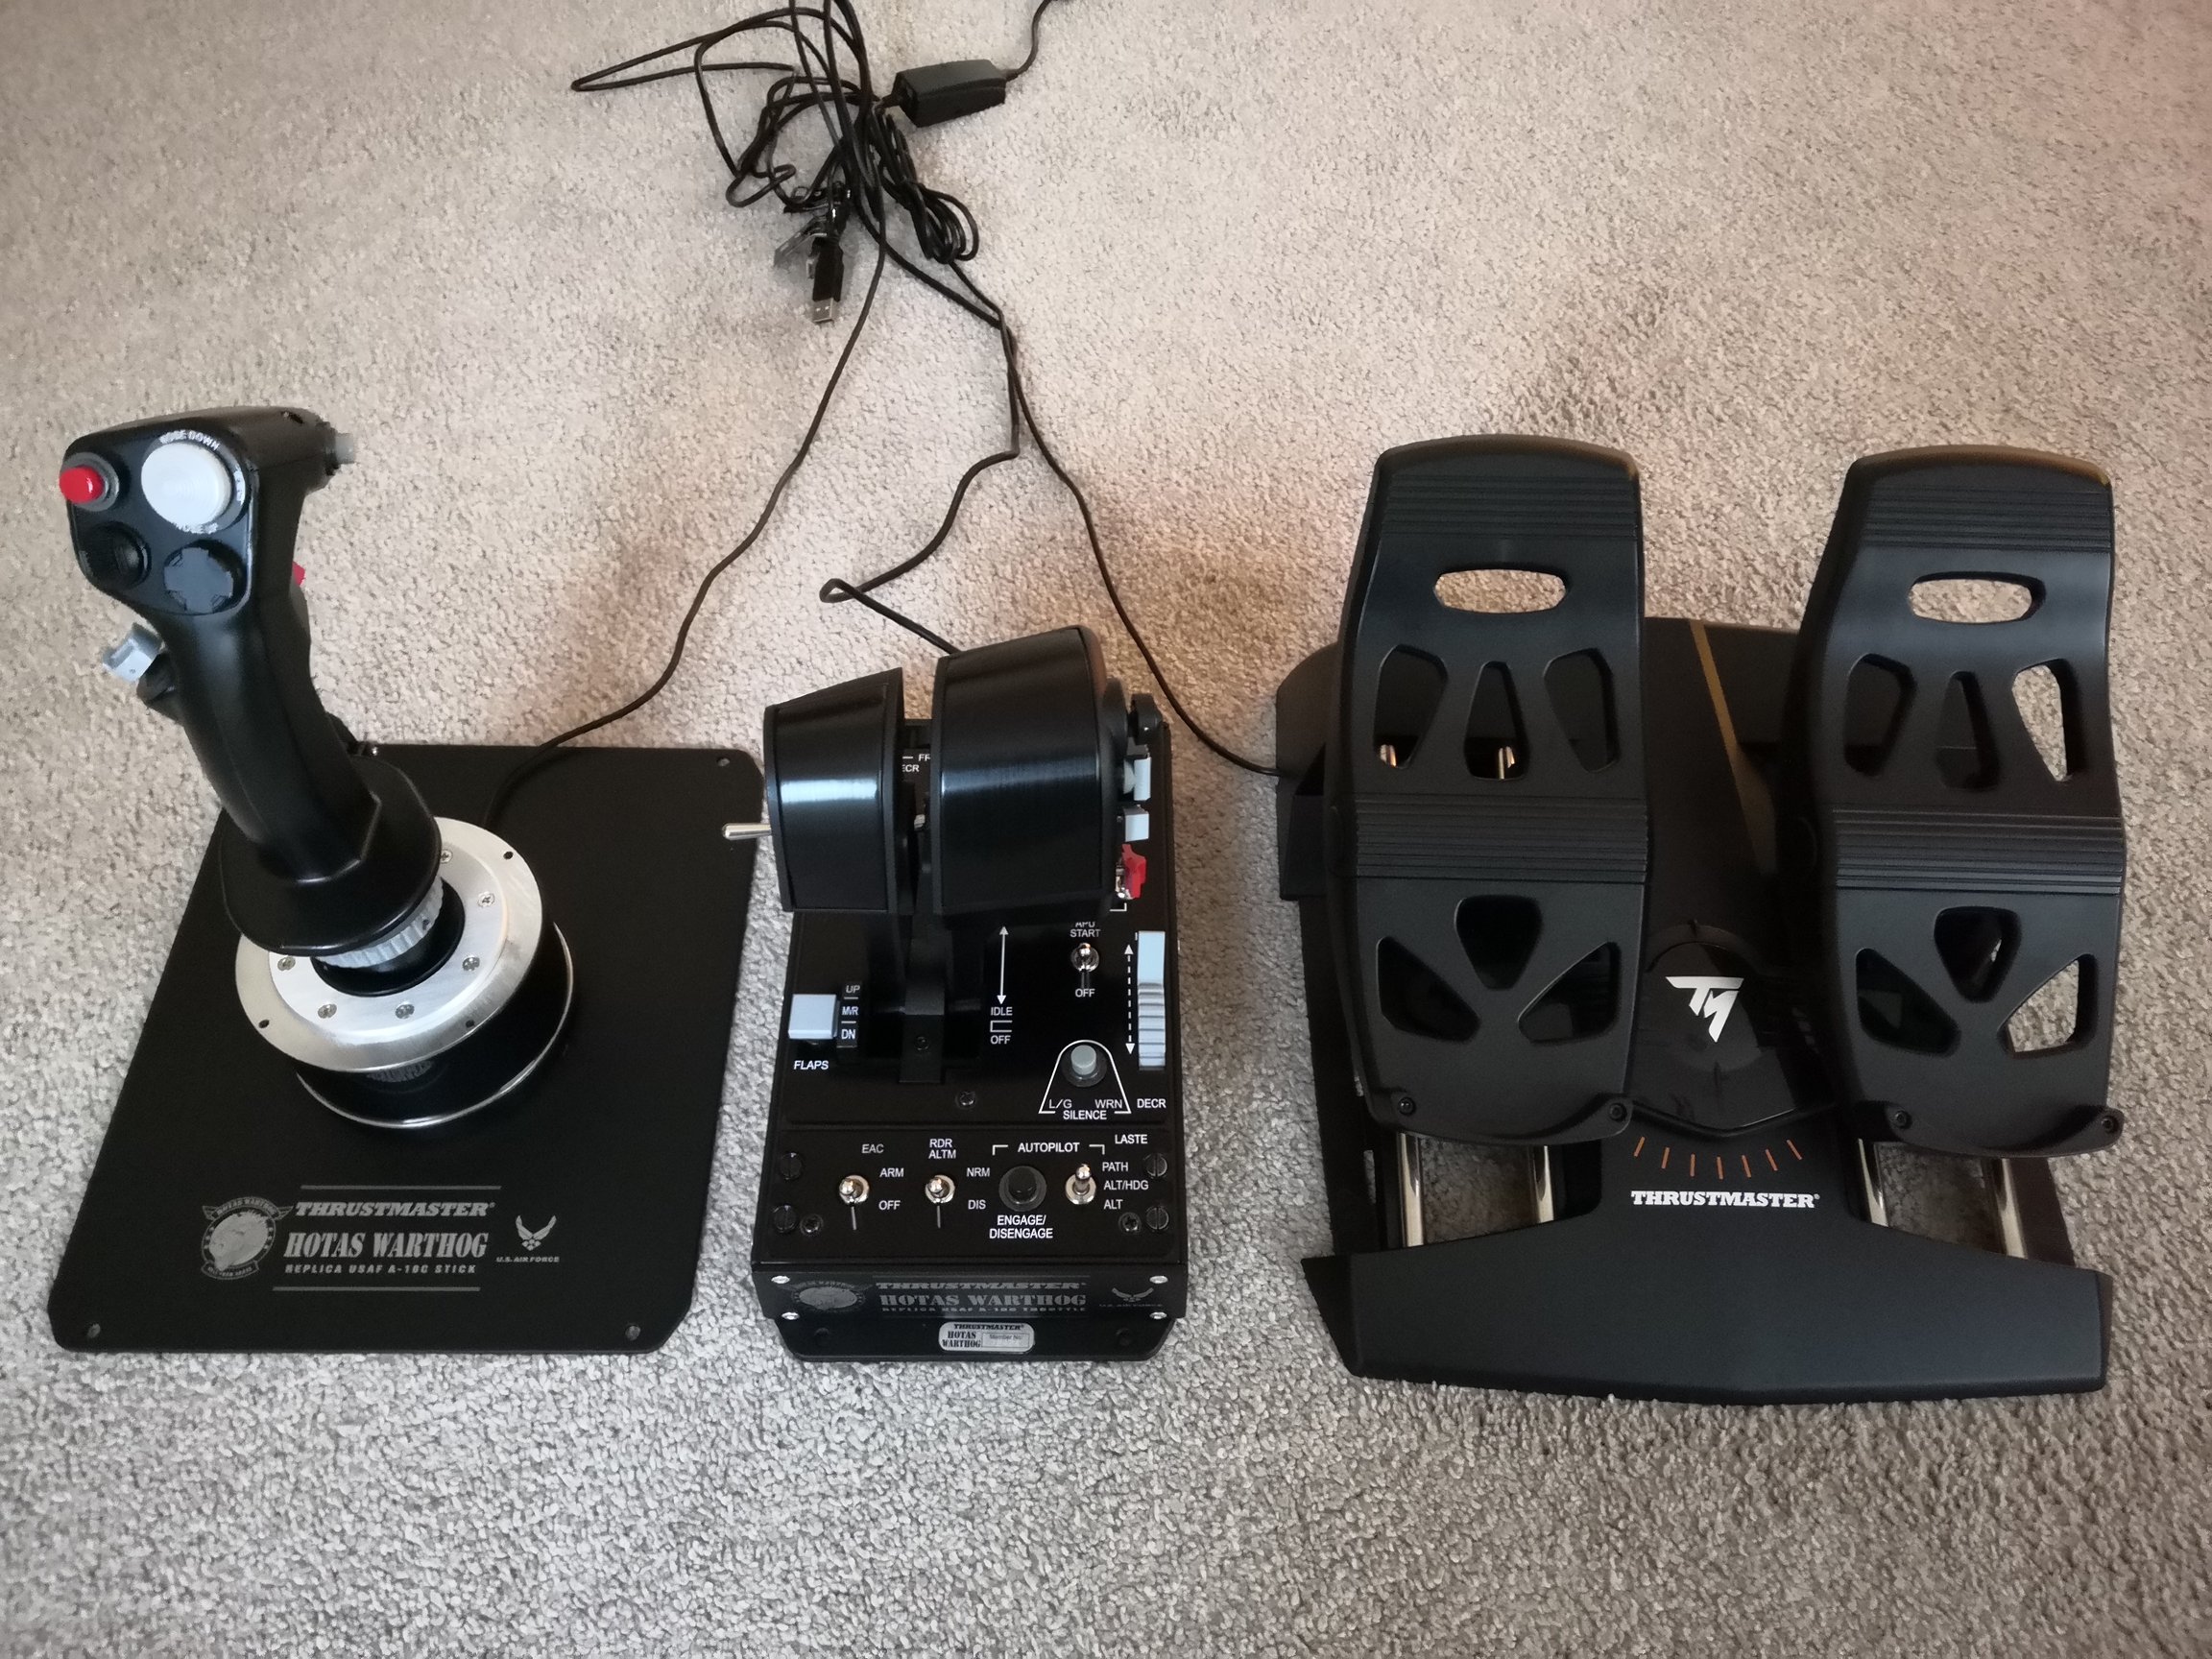 Sell - Thrustmaster Warthog HOTAS and TFRP Rudder Pedals | RaceDepartment